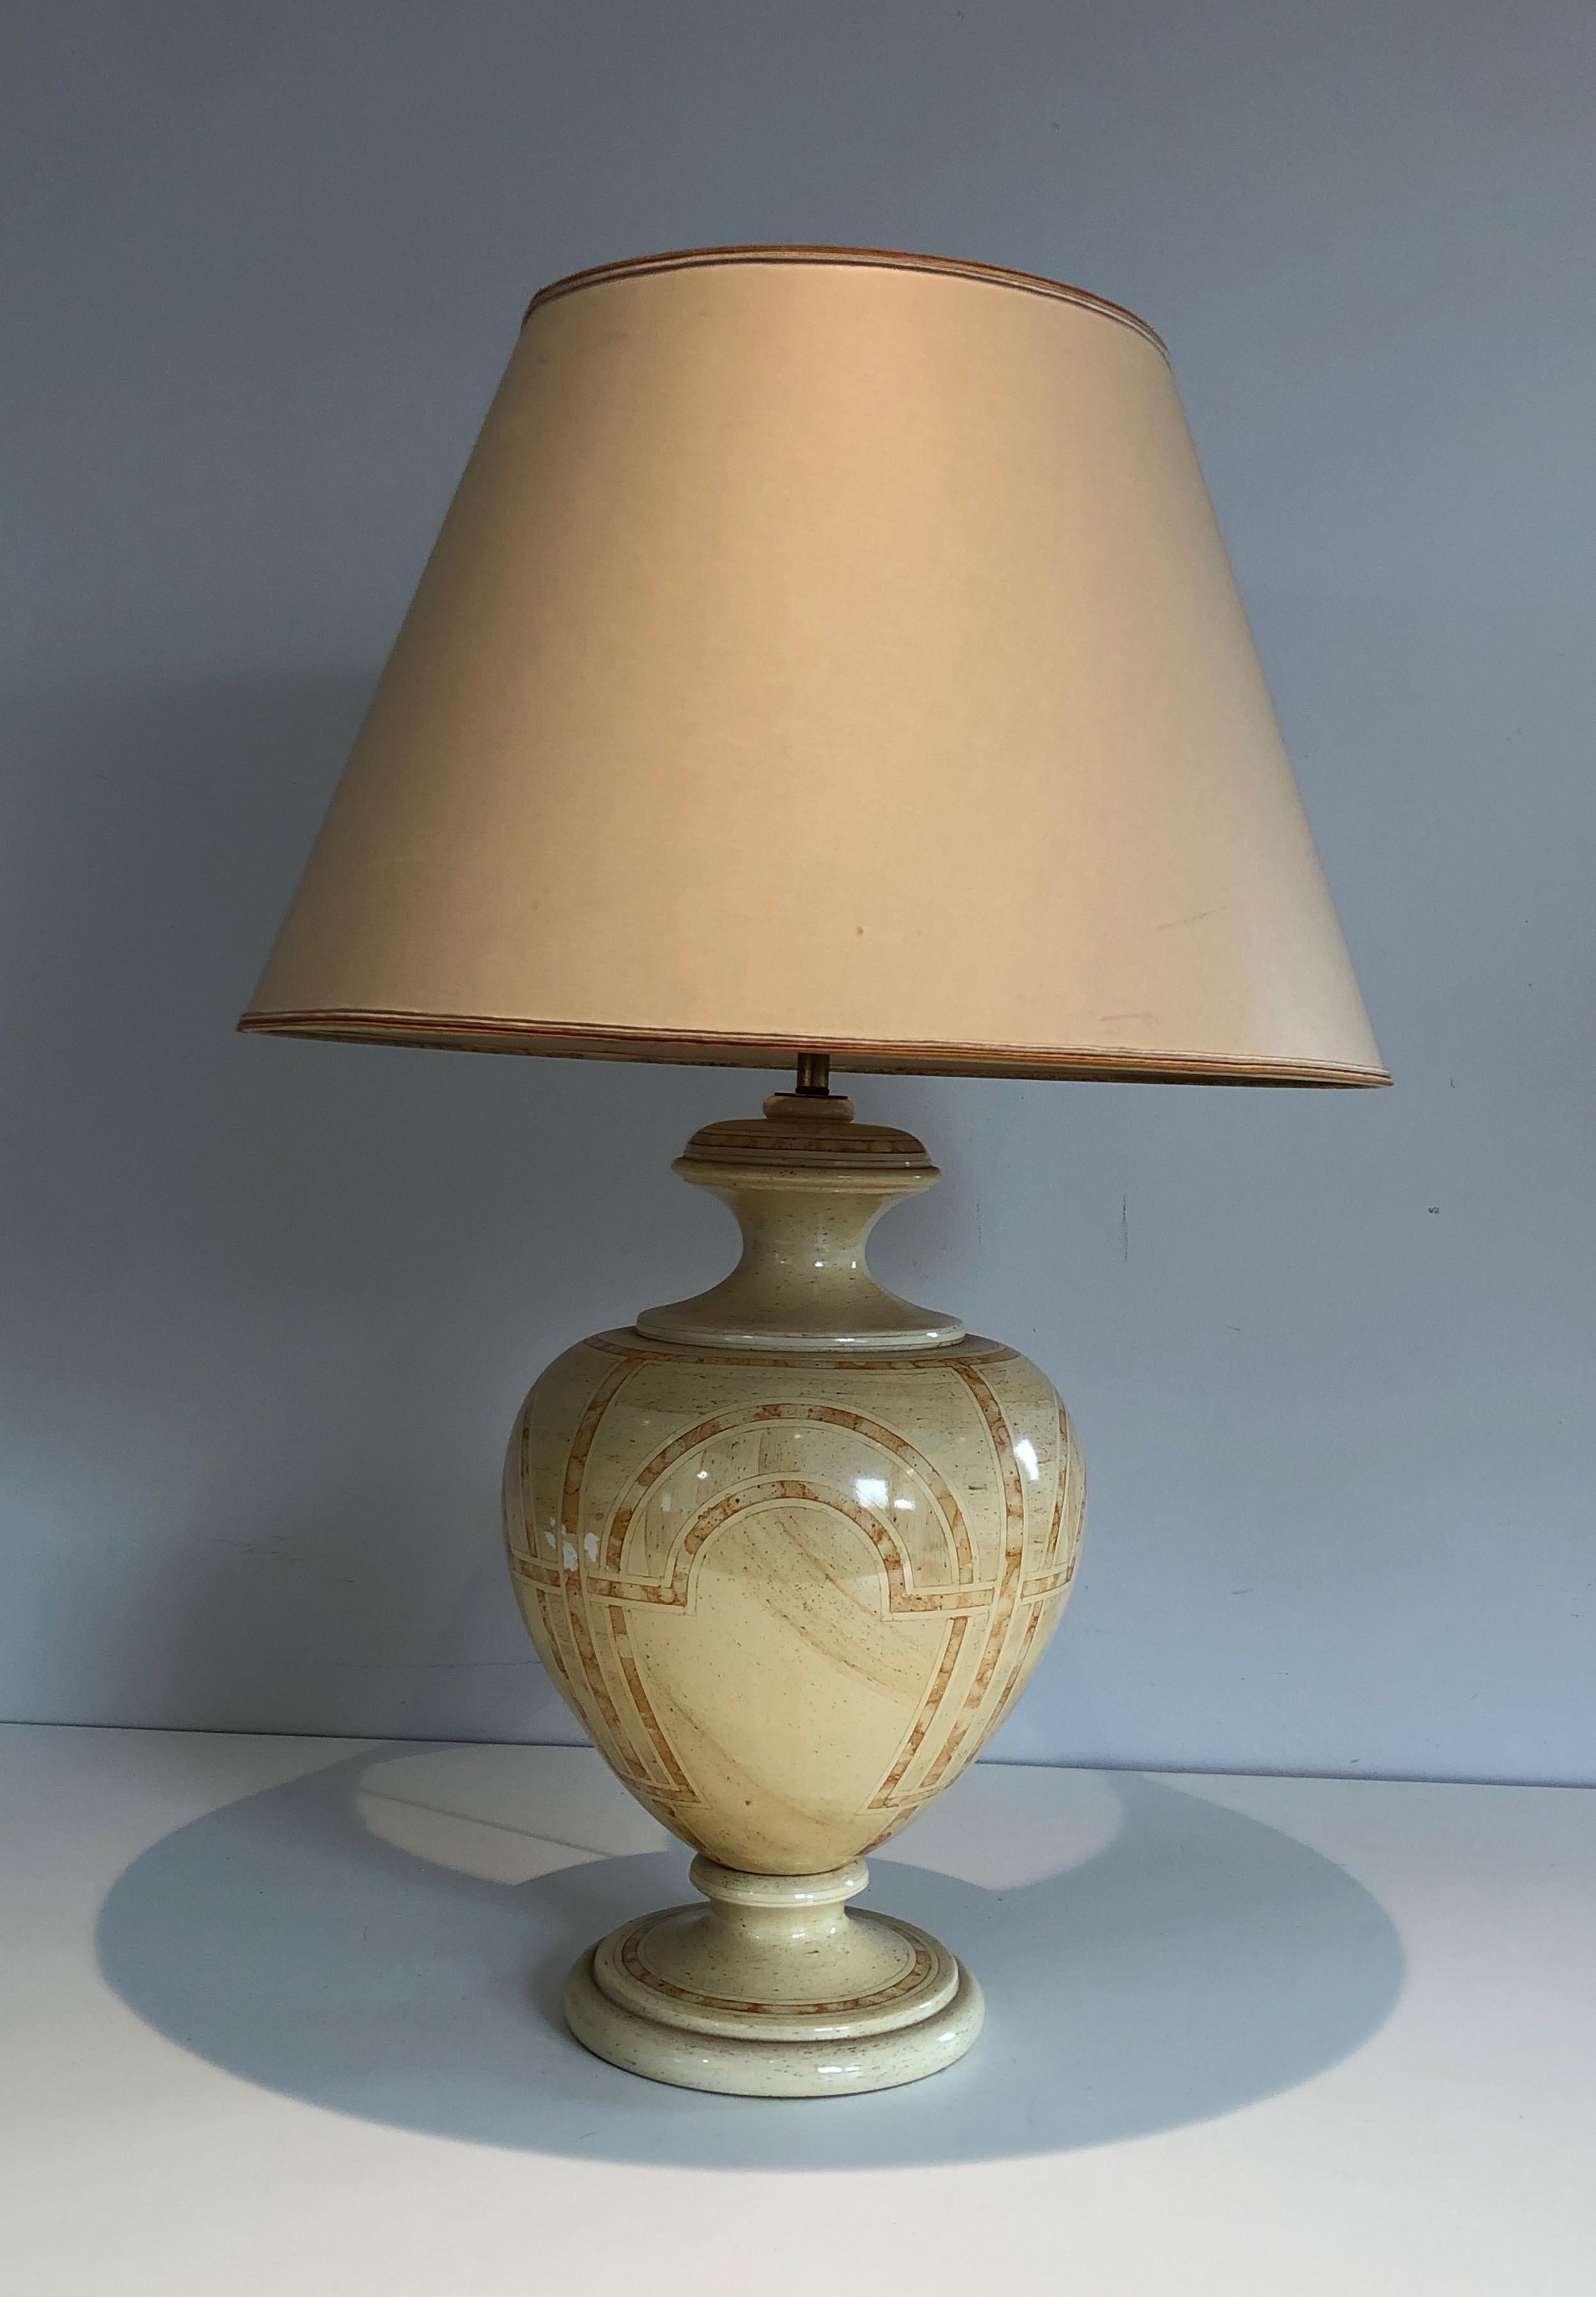 Eggshell Lacquered Table Lamp with Interlacing Decors, French Work, circa 1970 In Good Condition For Sale In Marcq-en-Barœul, Hauts-de-France